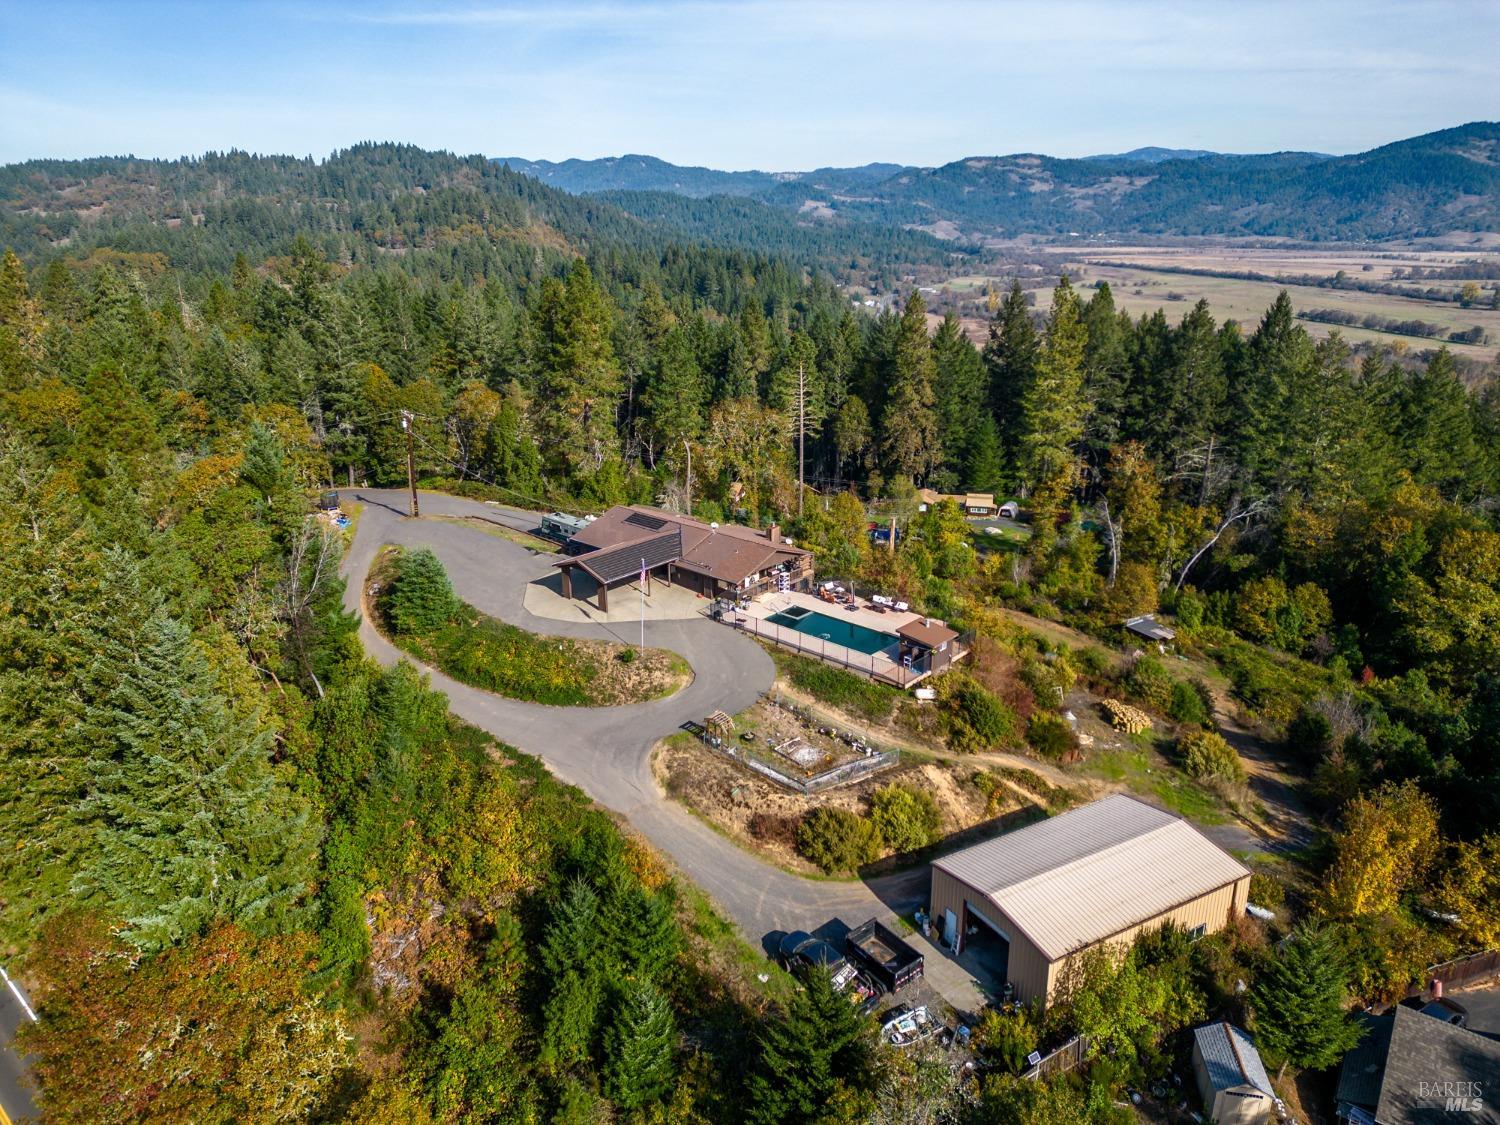 Photo of 23981 Sherwood Rd in Willits, CA